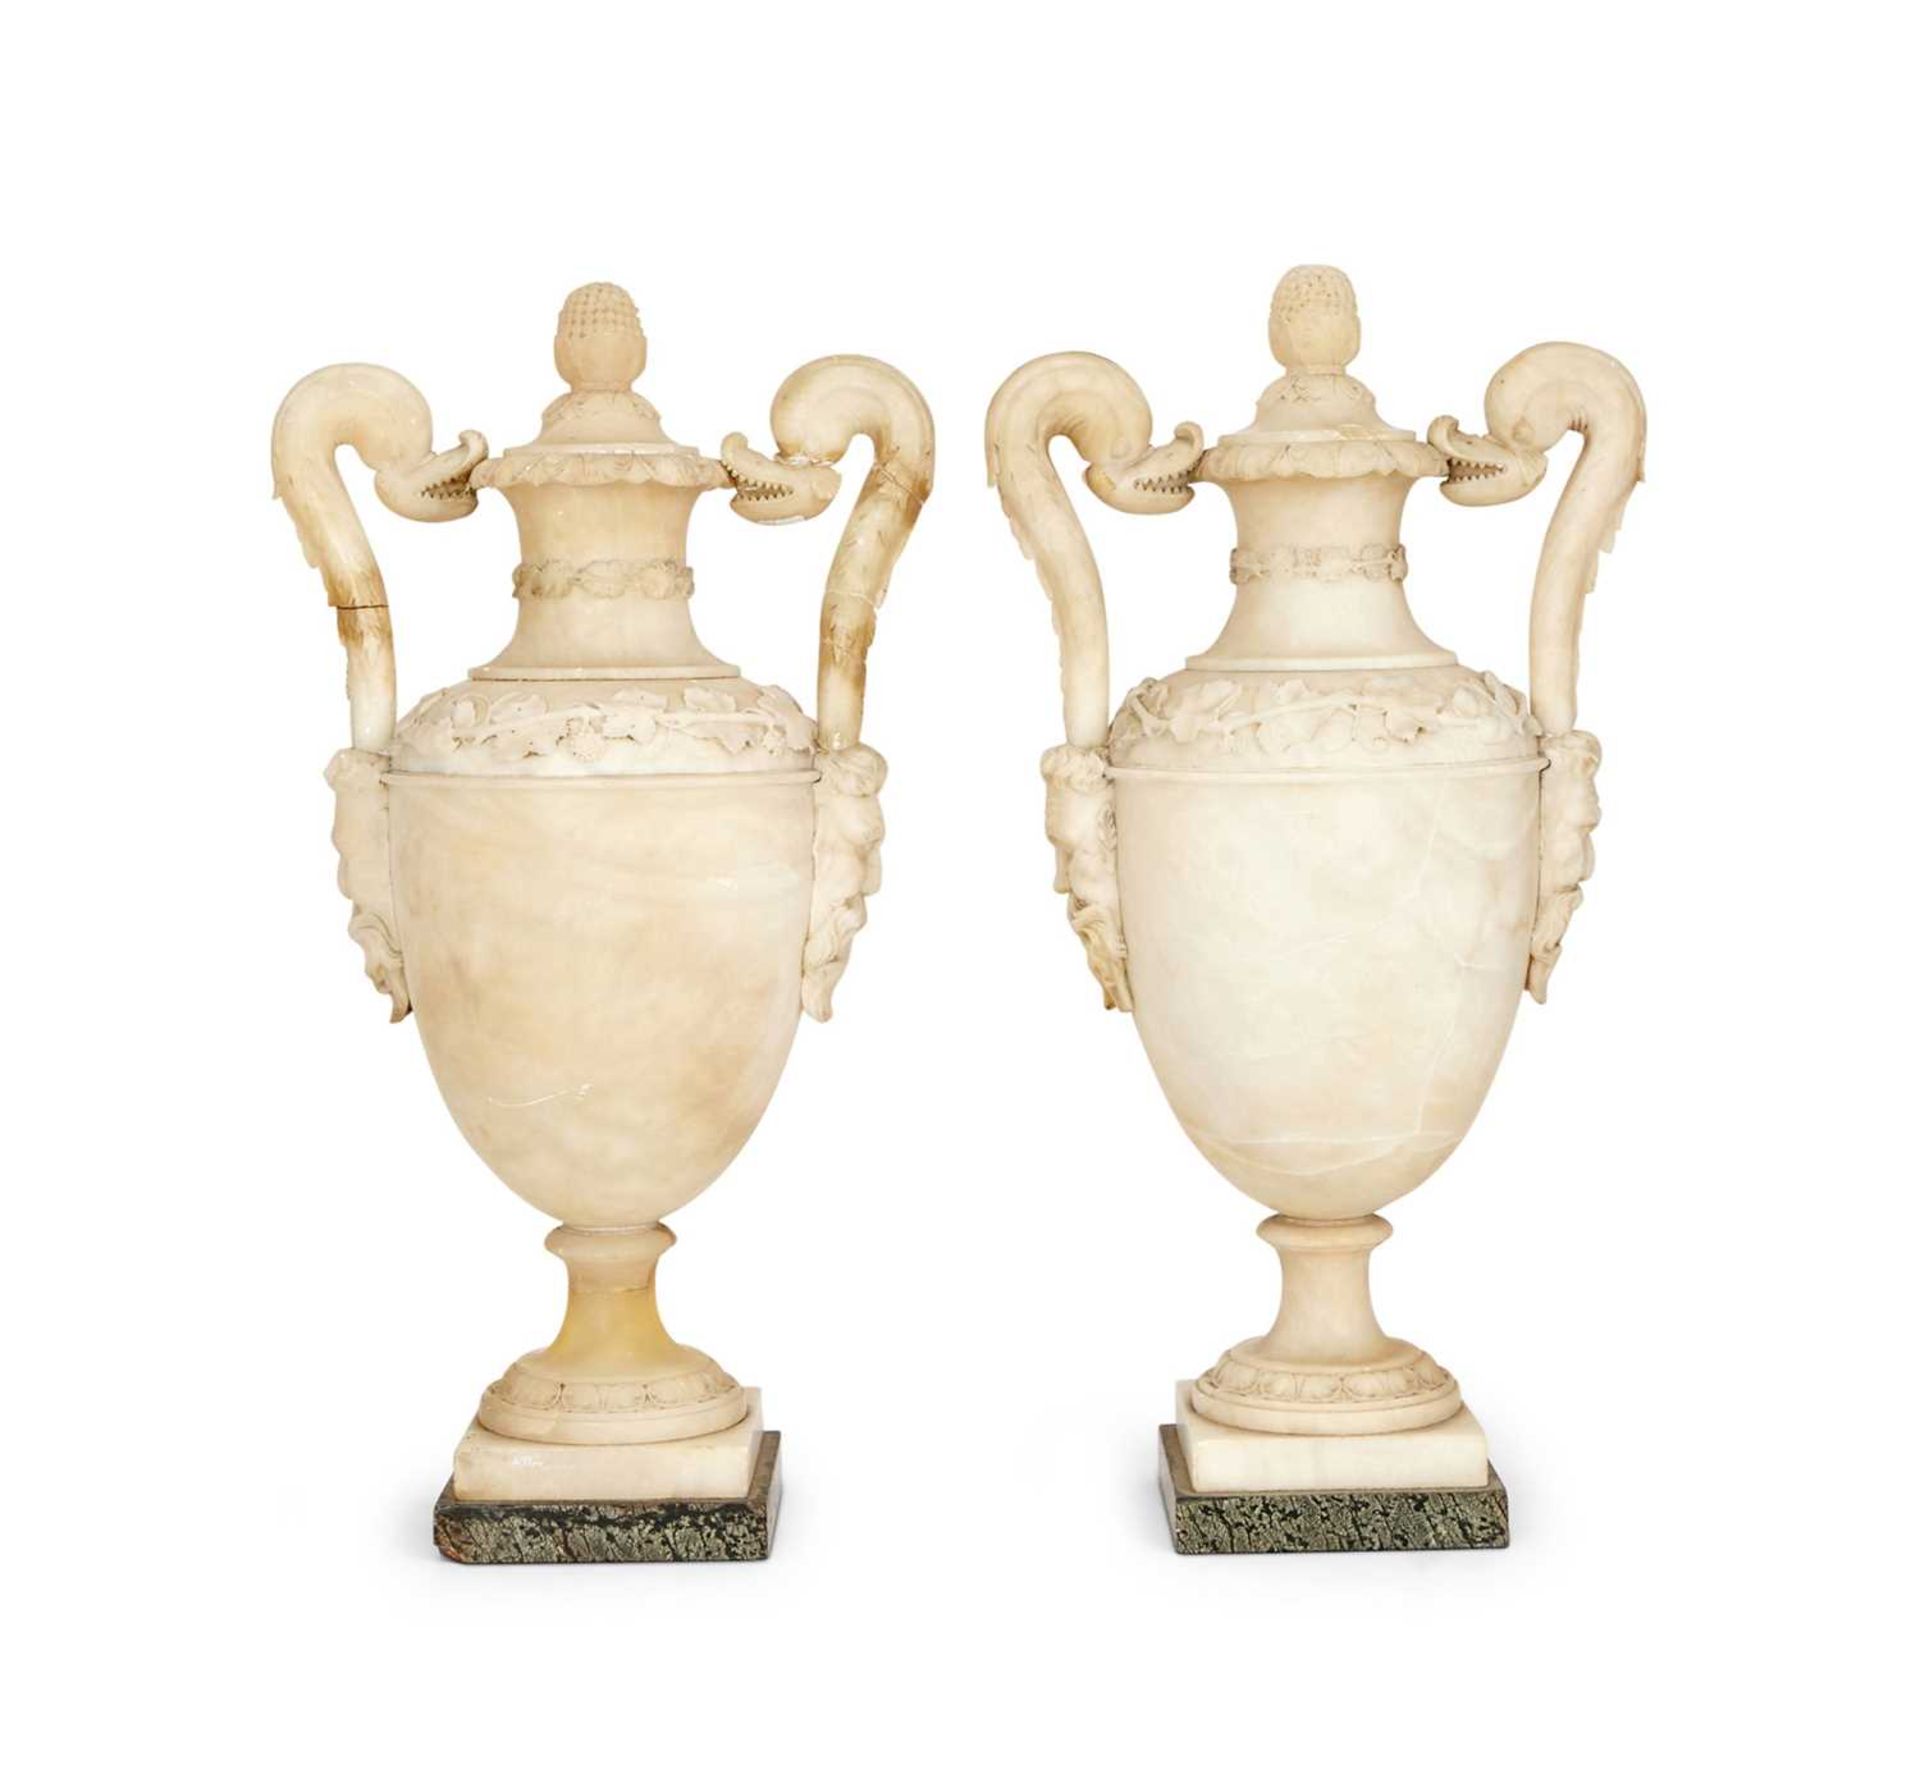 A LARGE PAIR OF 19TH CENTURY ITALIAN ALABASTER URNS AND COVERS IN THE STYLE OF PIRANESI - Image 10 of 12